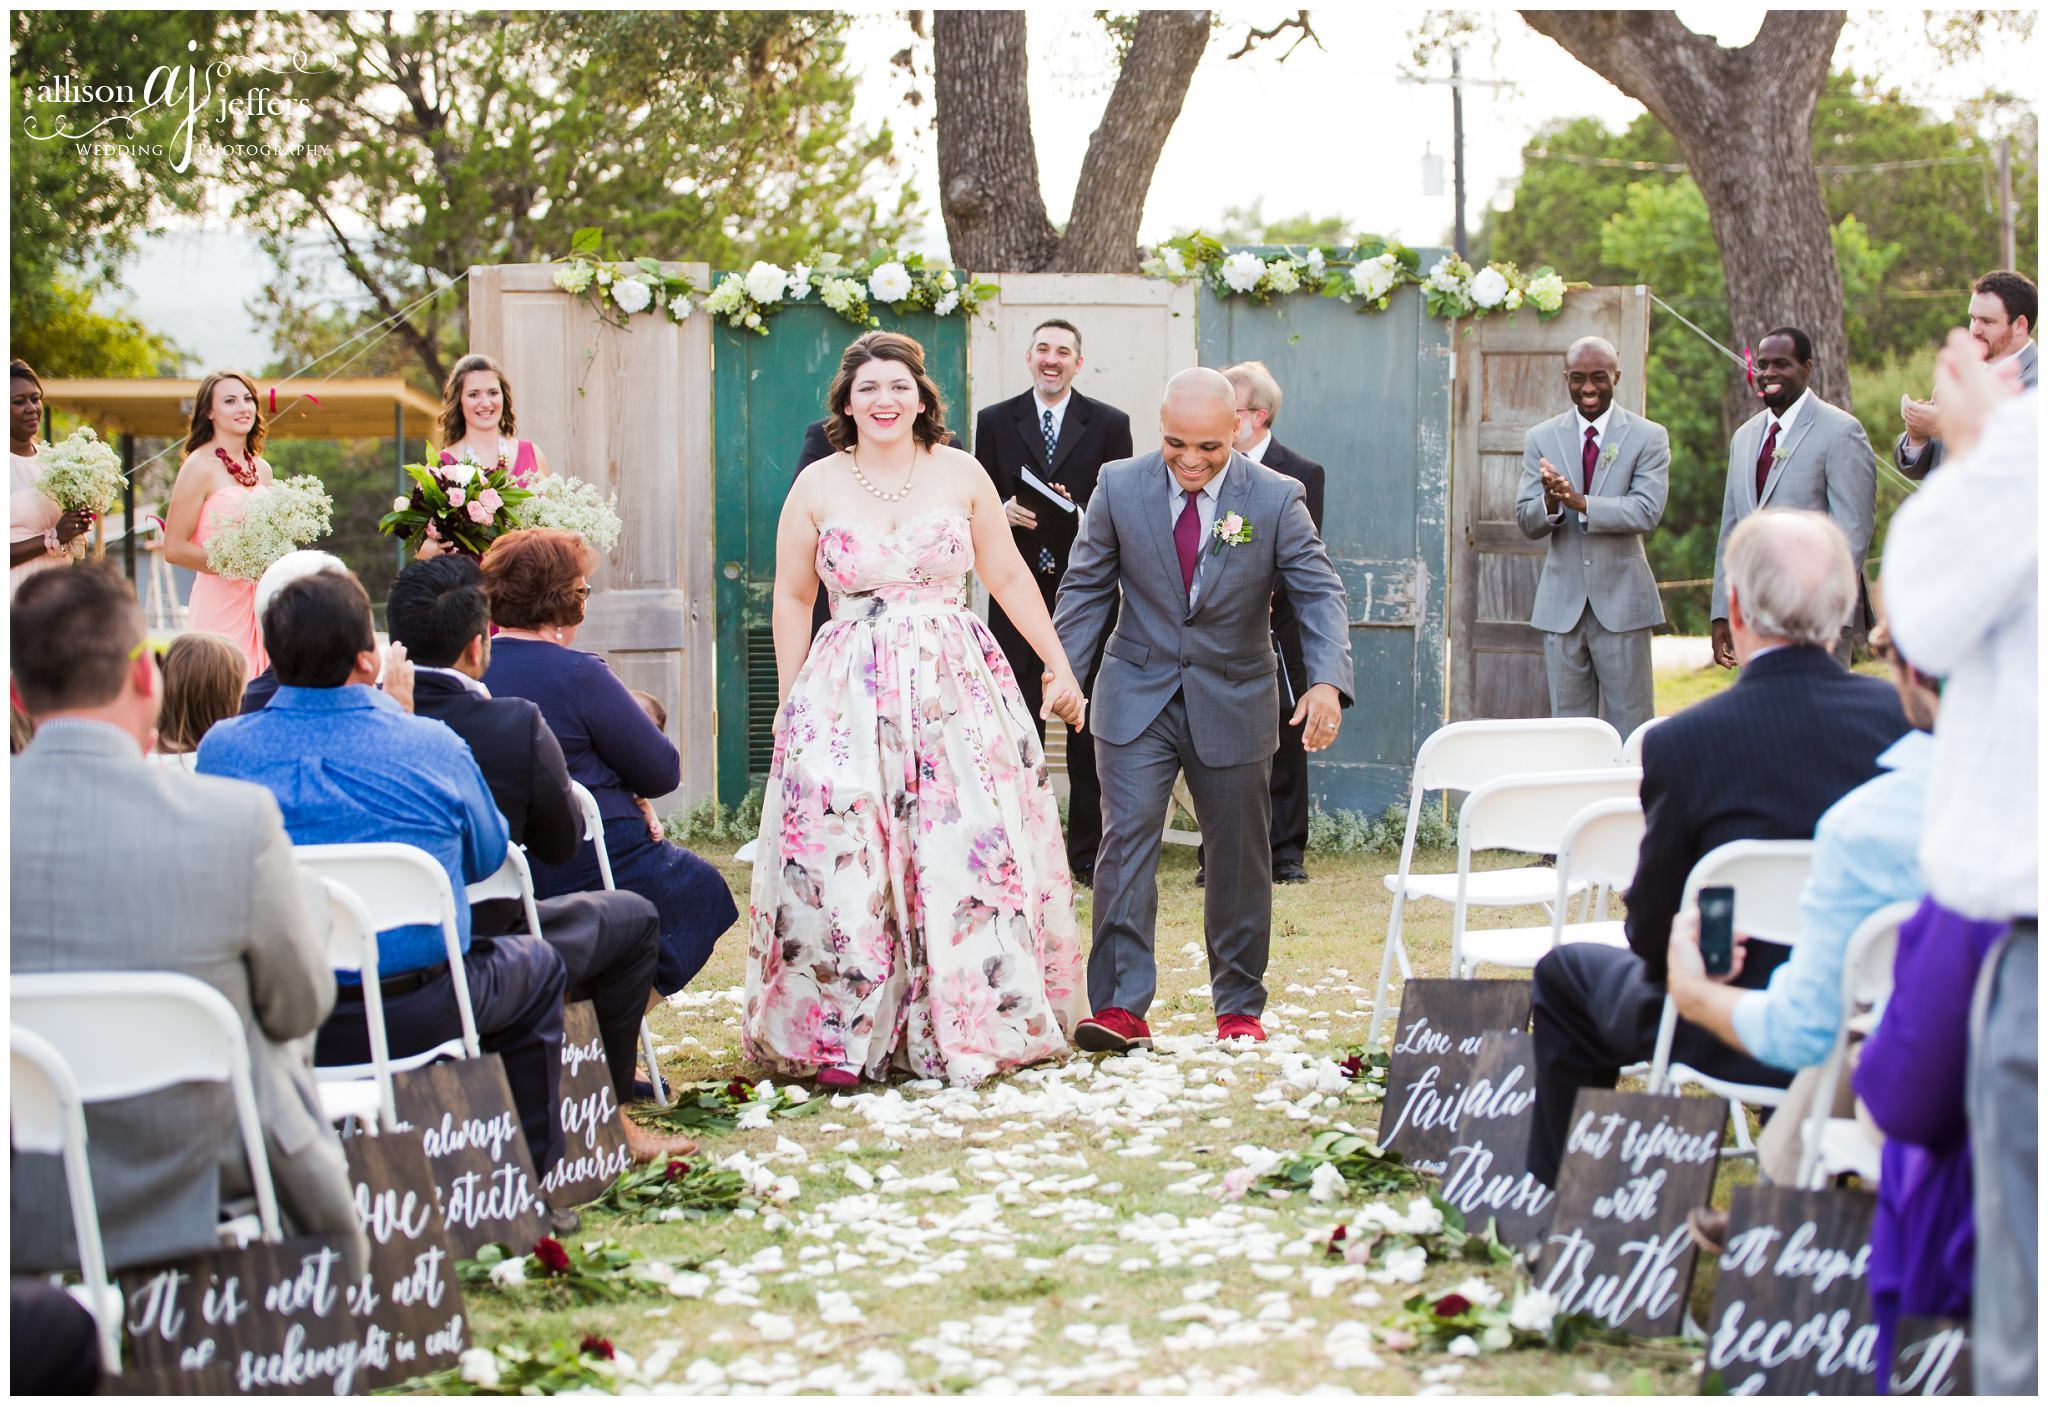 Kerrville Wedding Photographer Unique fun wedding with floral dress 0049